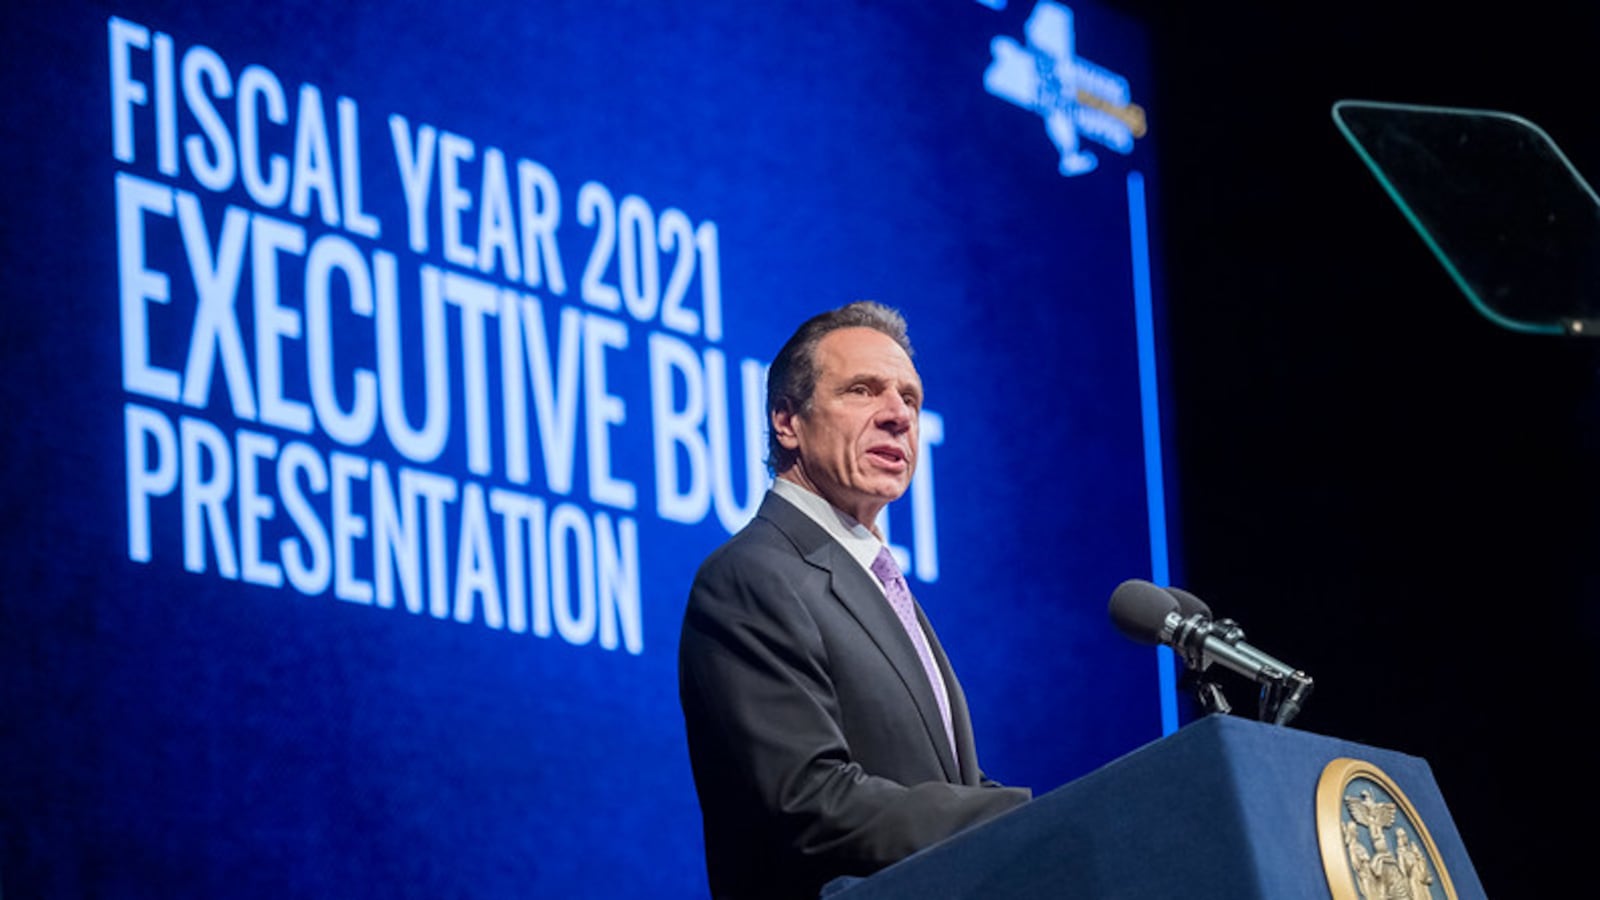 Gov. Andrew Cuomo proposes his fiscal year 2021 budget in Albany, January 18, 2020.